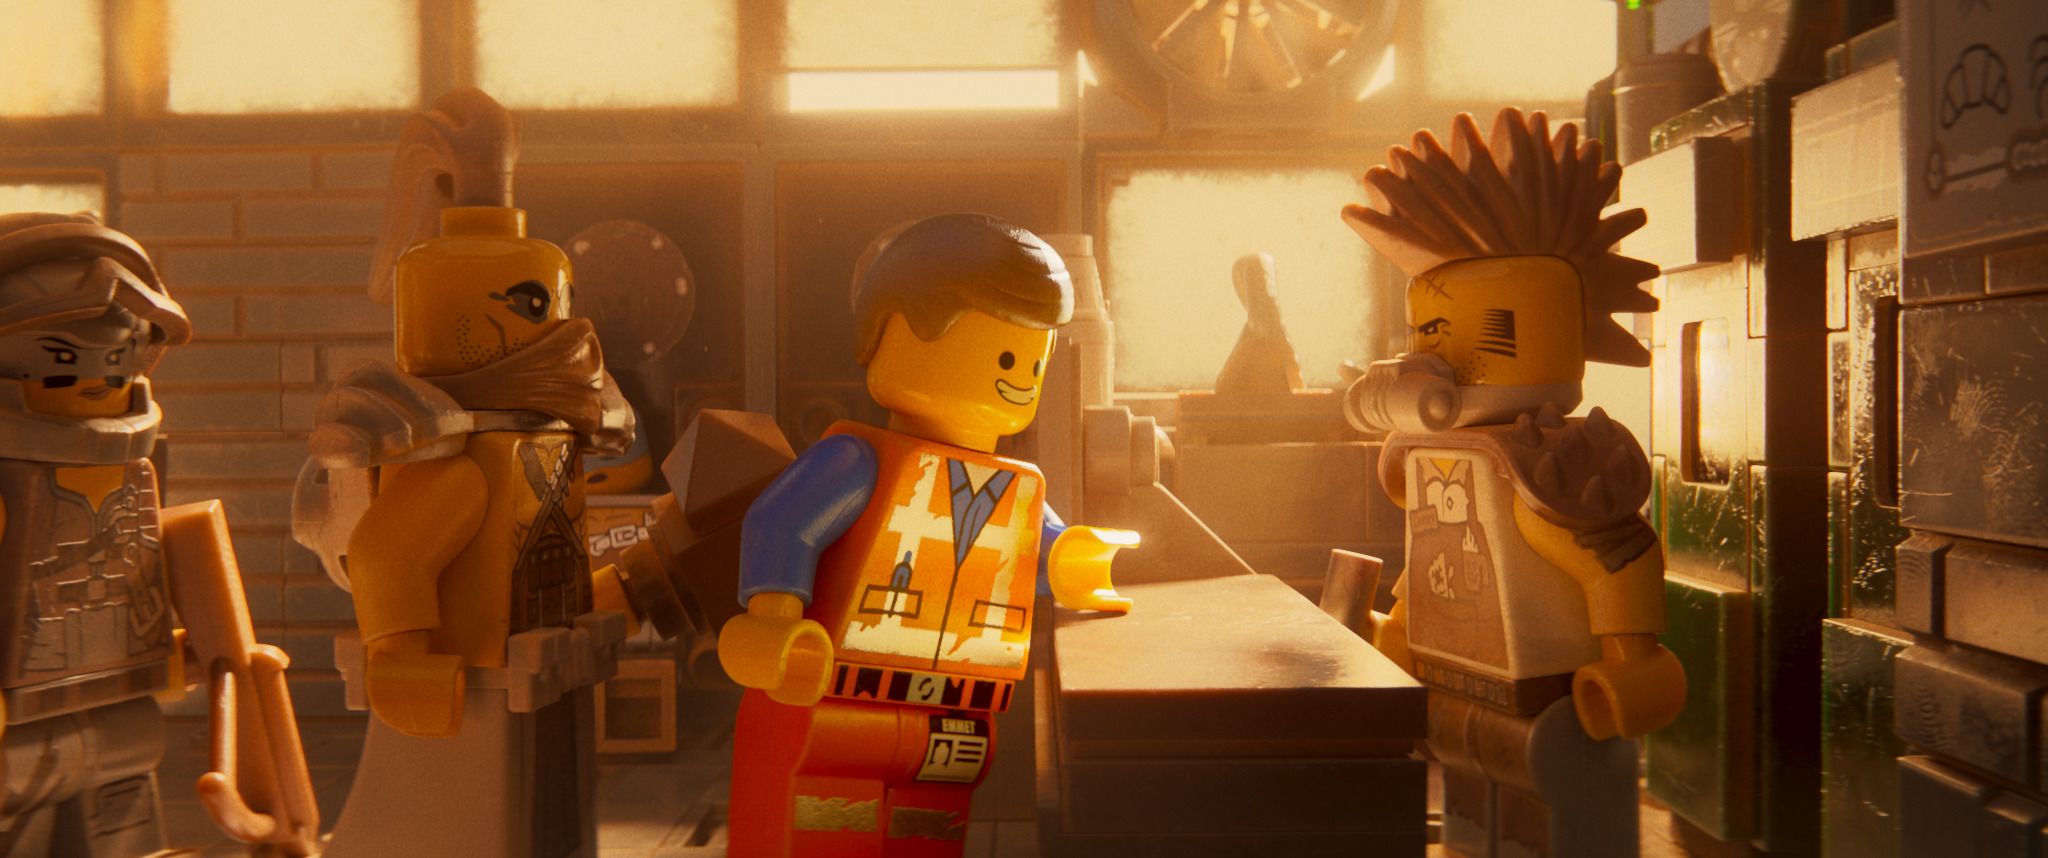 New LEGO Movie 2 Images Tease Superman, Wonder Woman, and More | Collider2048 x 858